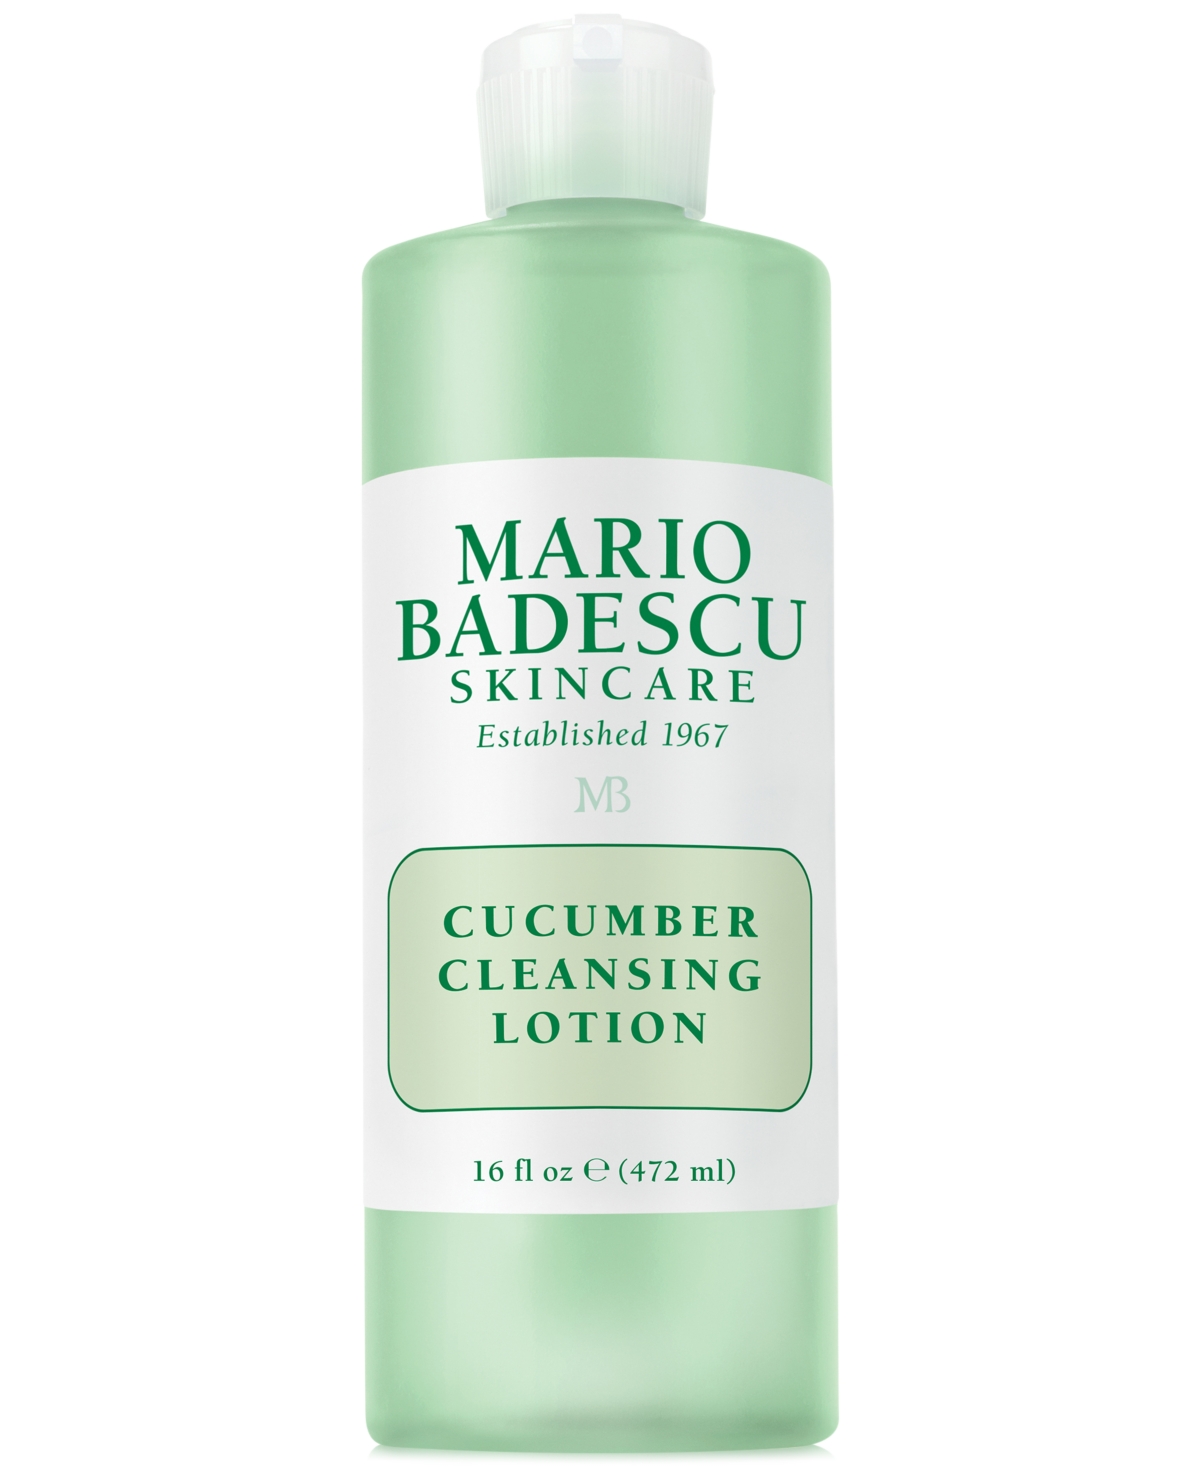 Cucumber Cleansing Lotion, 16-oz.